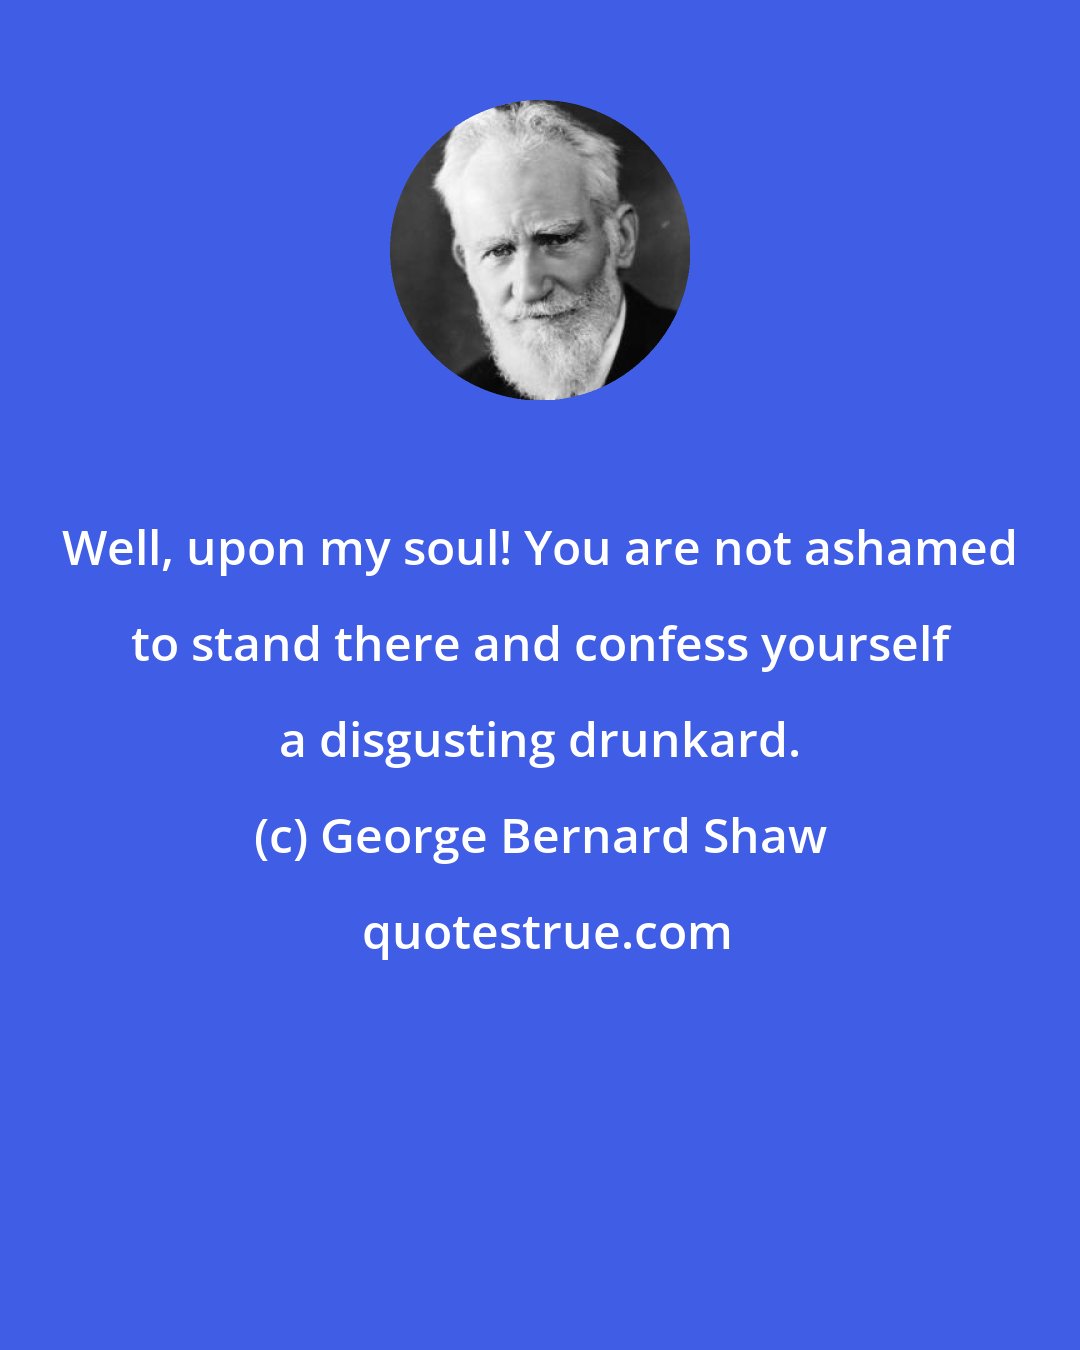 George Bernard Shaw: Well, upon my soul! You are not ashamed to stand there and confess yourself a disgusting drunkard.